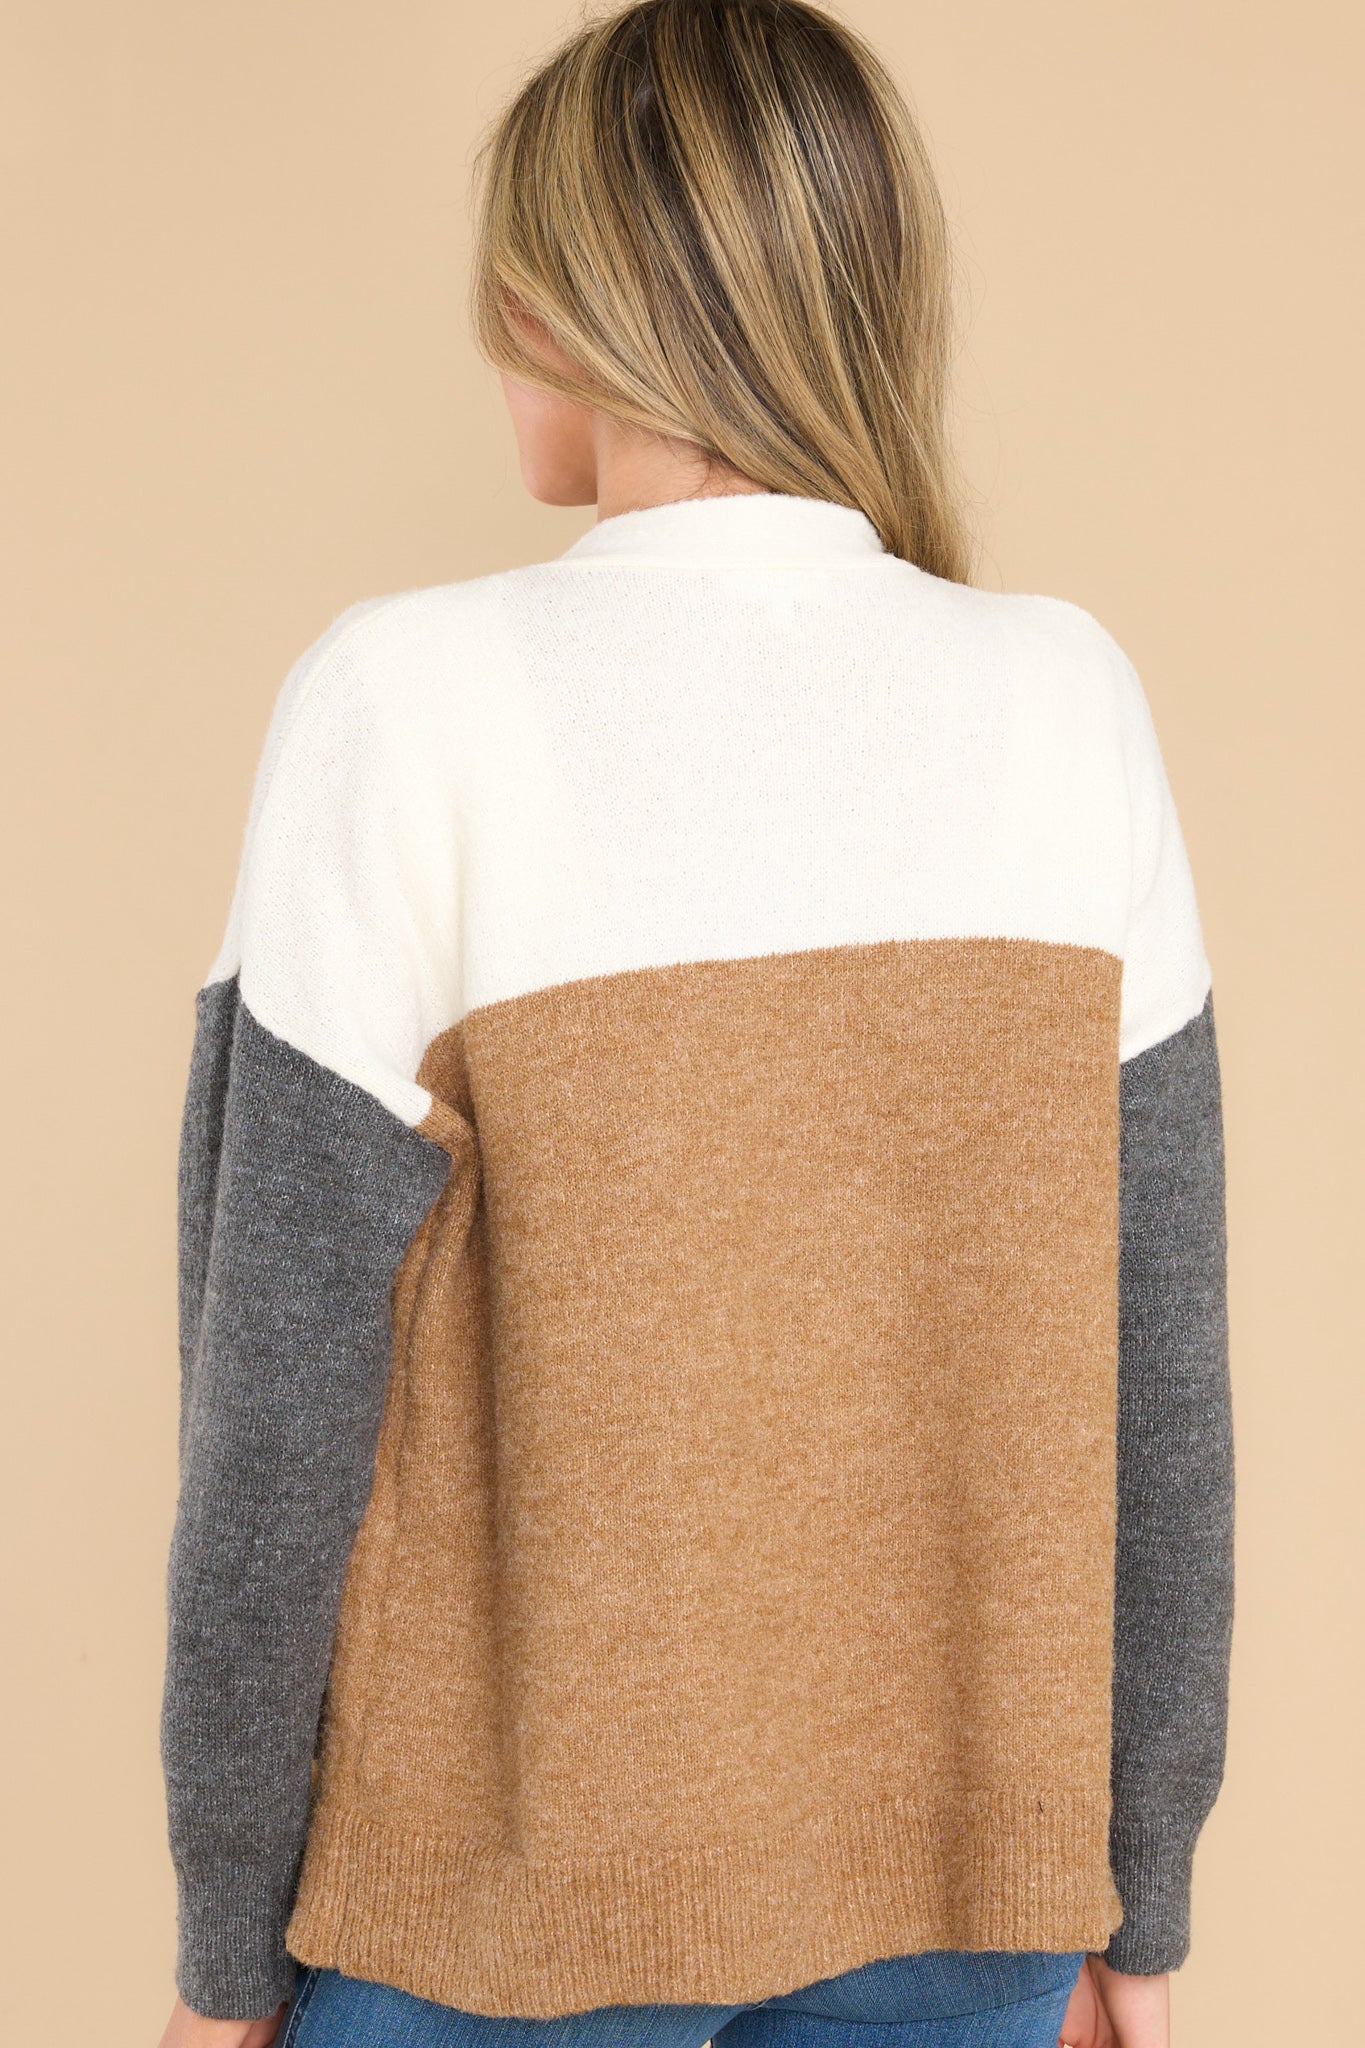 Back view of this cardigan that features a v-neckline with functional buttons down the front, functional pockets, and a soft, wooly feel.